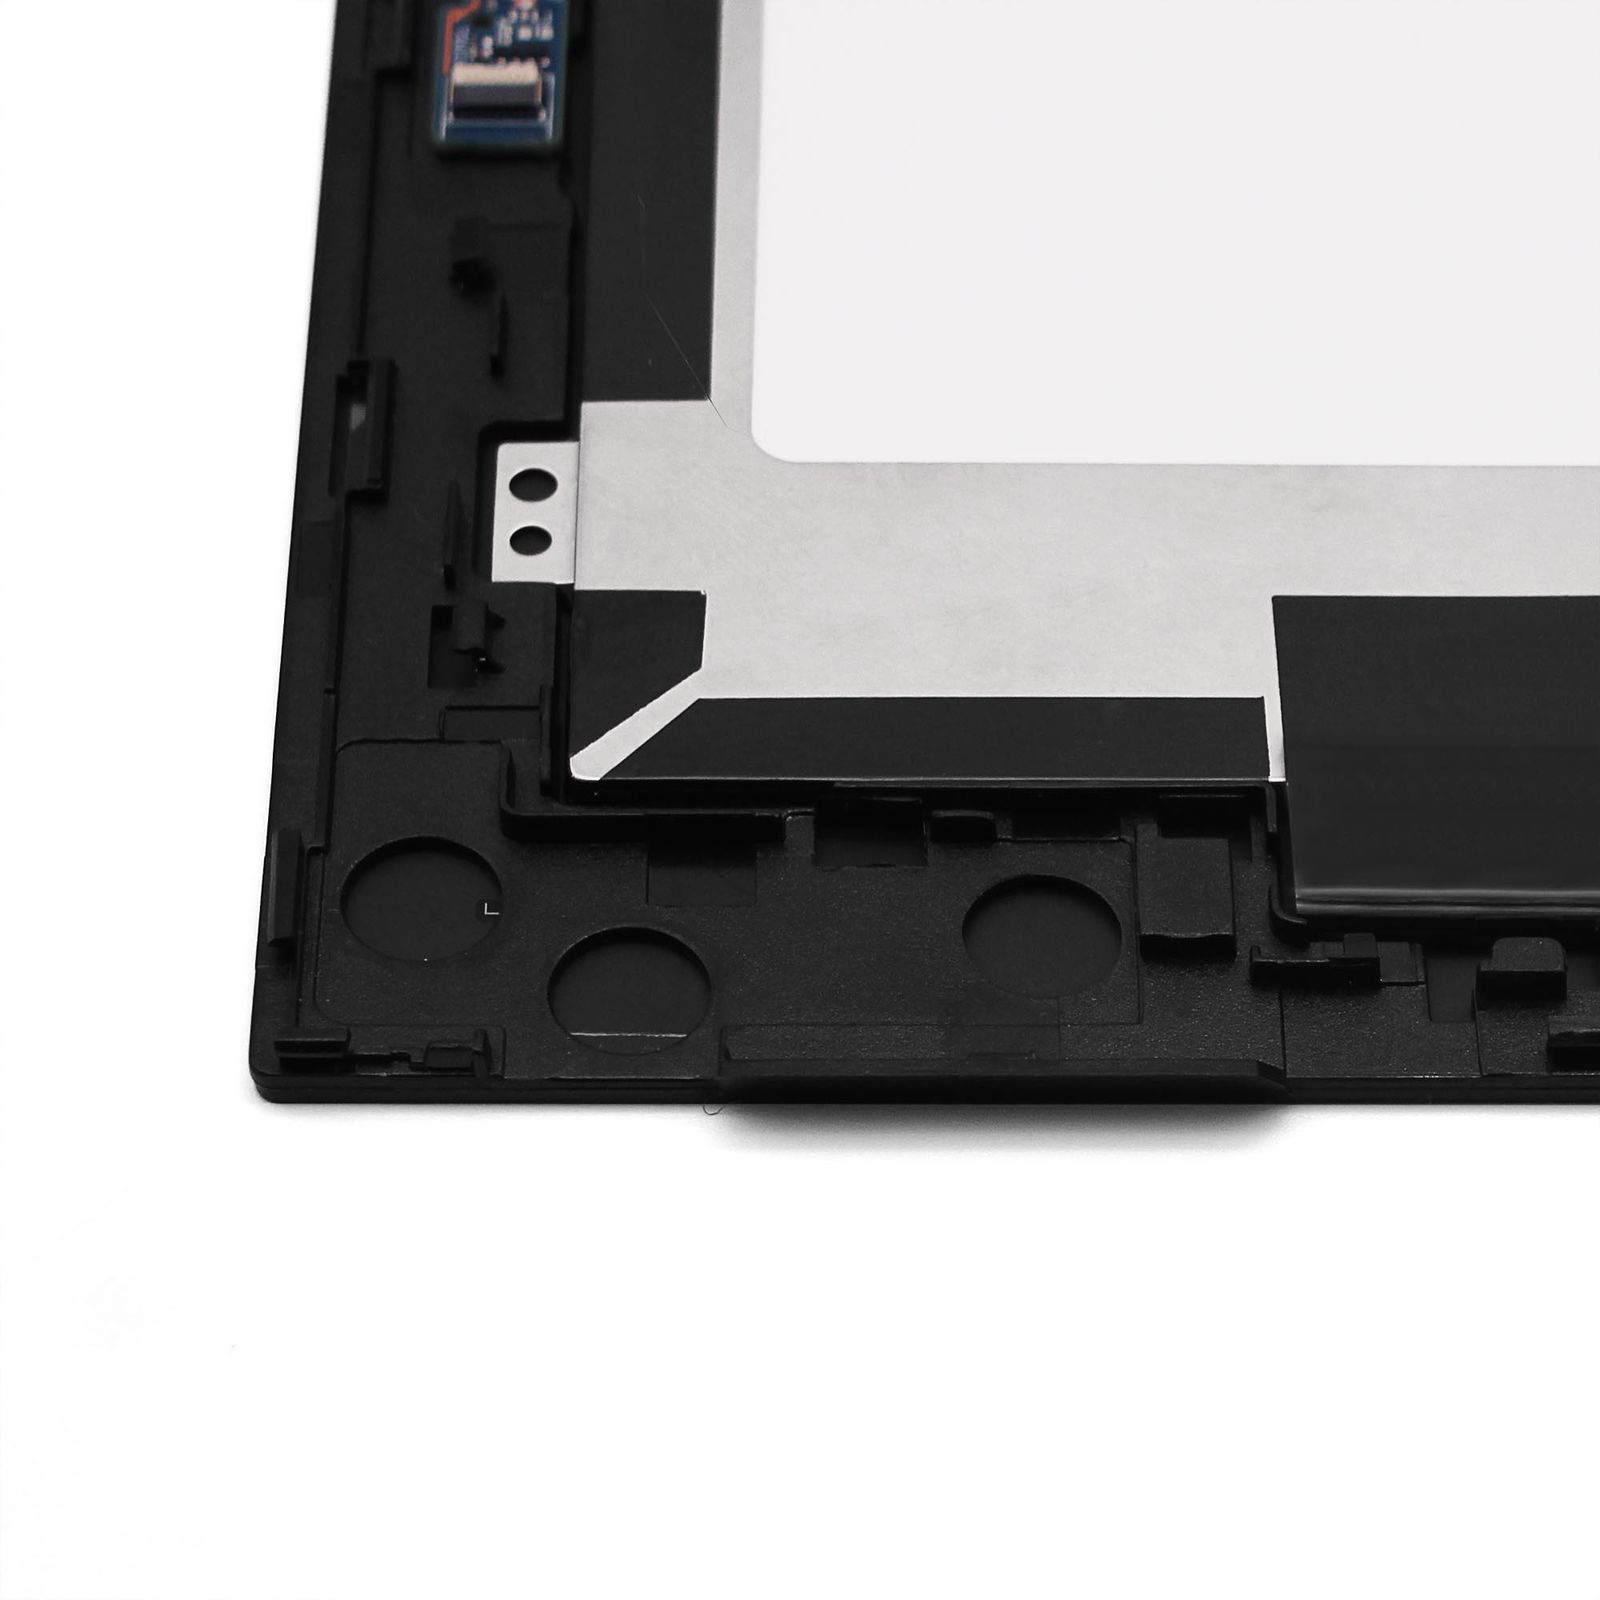 Screen Display Replacement For HP PAVILION 11-U010TU LCD Touch Digitizer Assembly